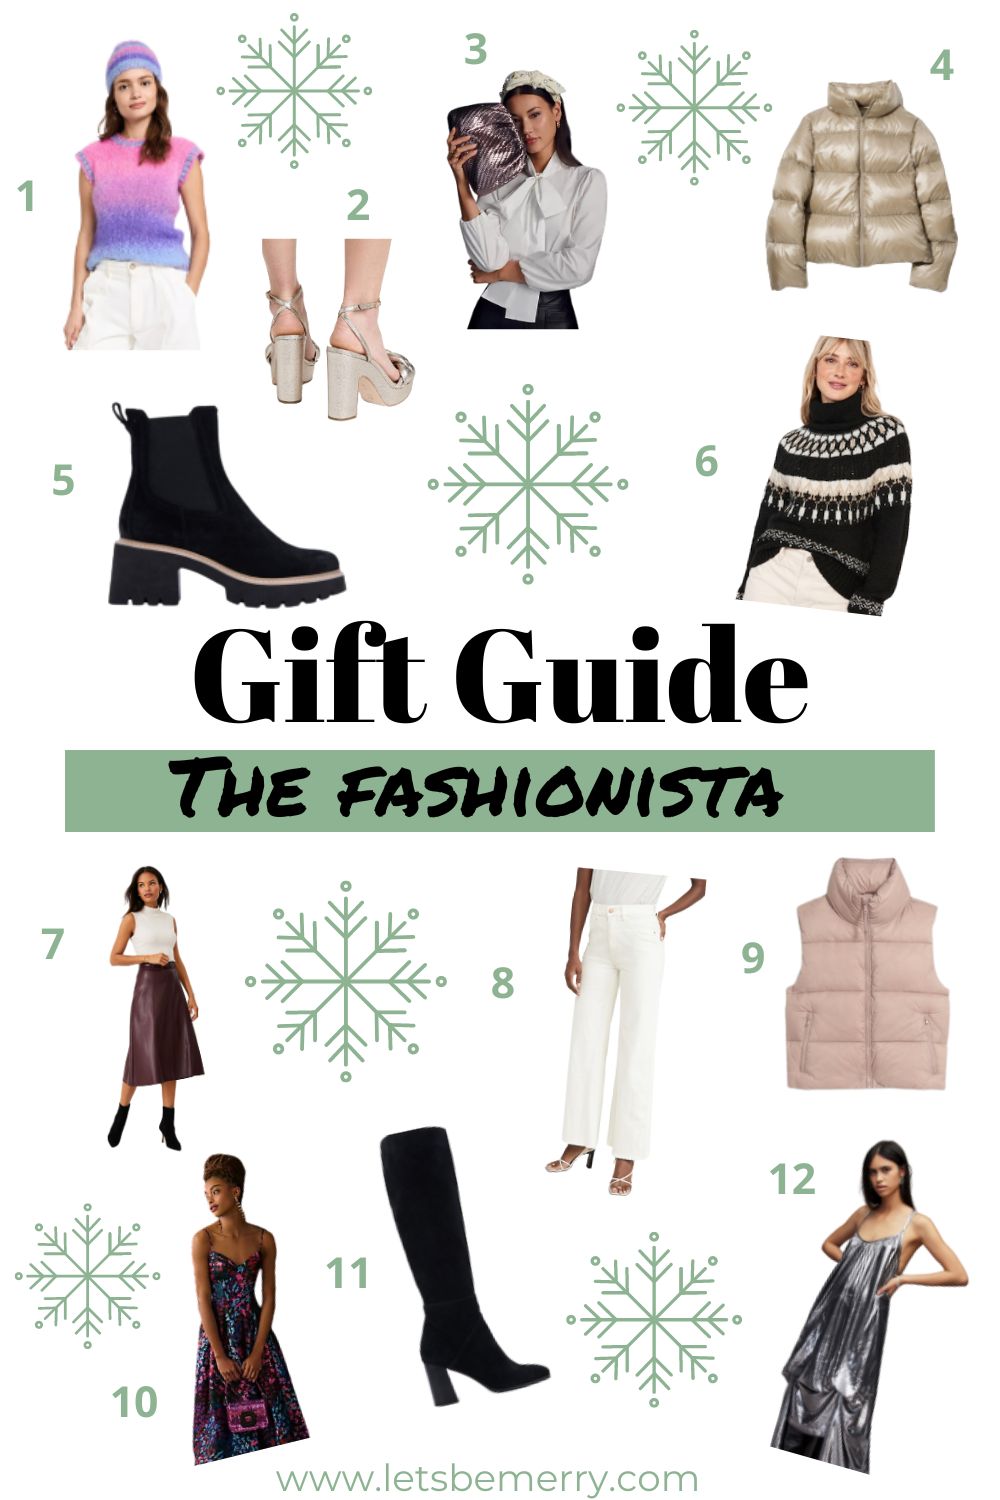 63 Best Gifts for Women 2022 to Give and Receive This Holiday Season